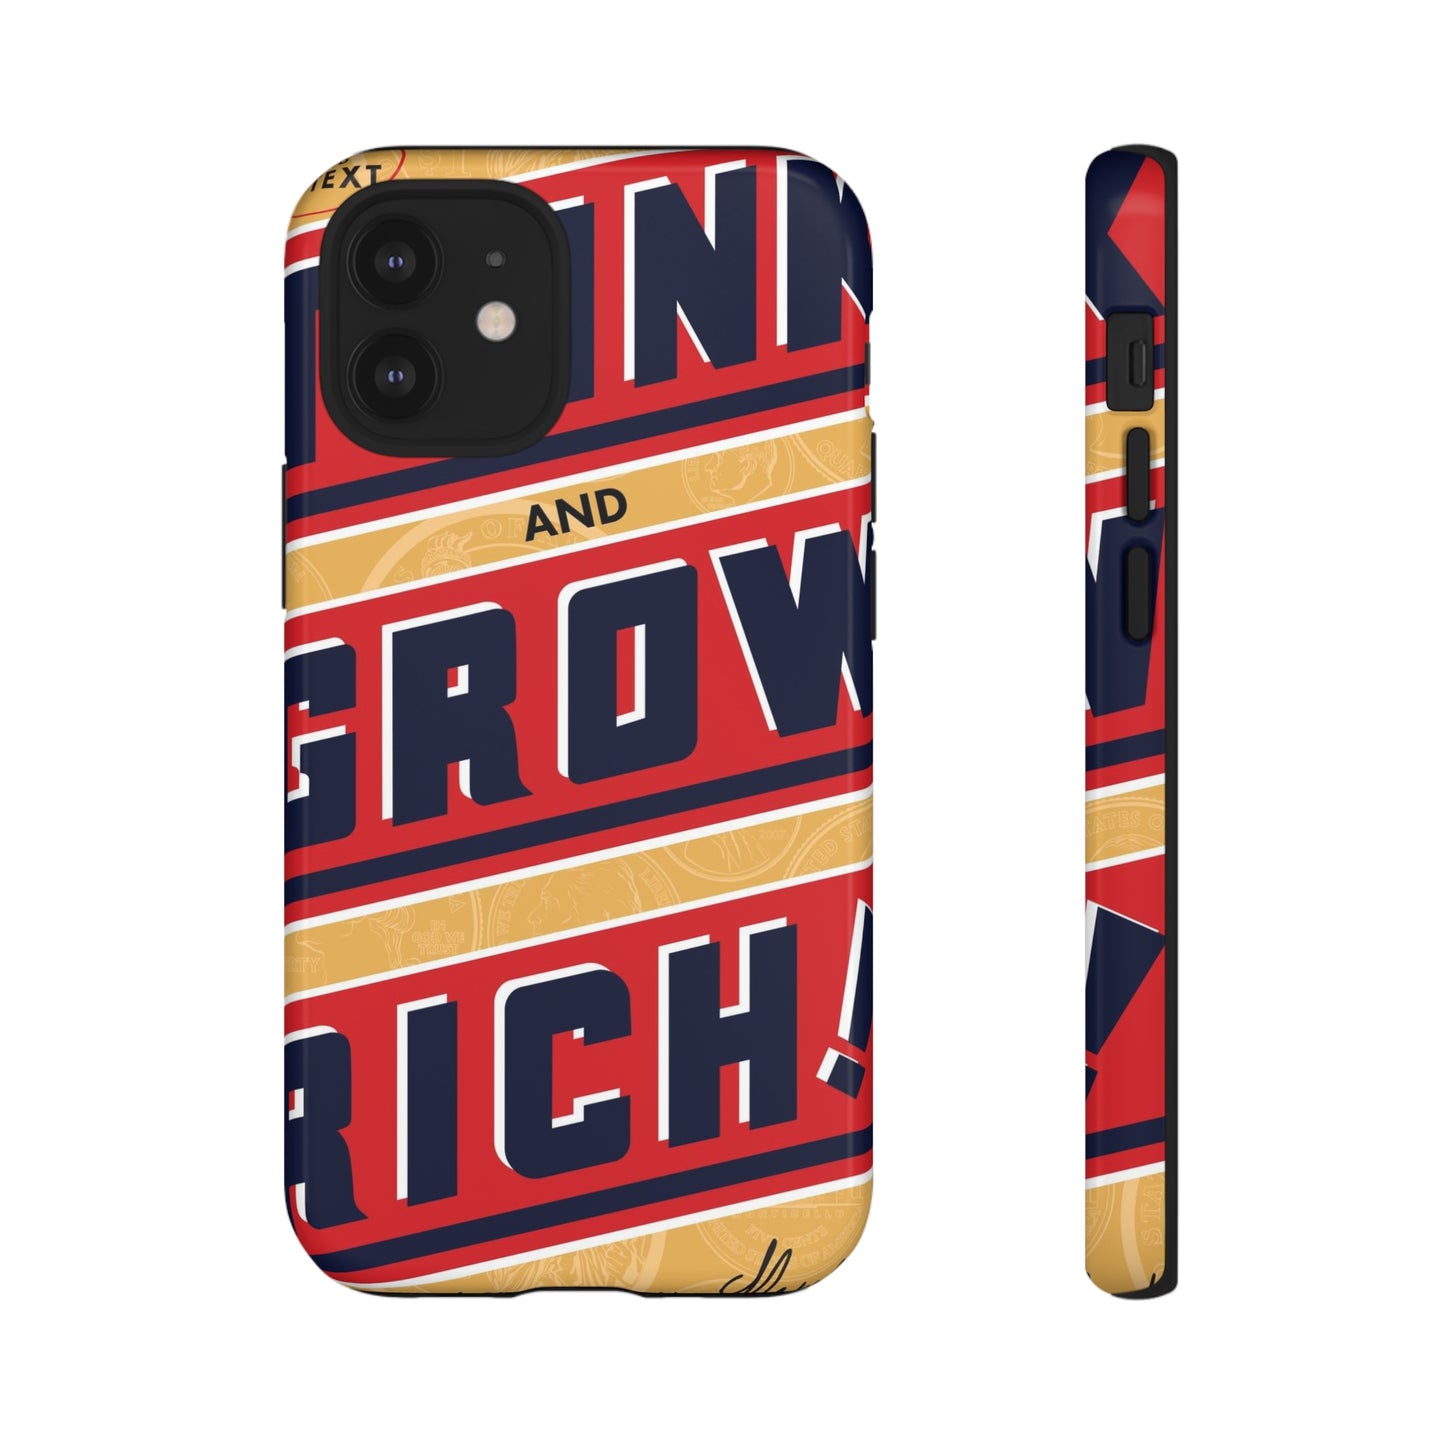 Modern "Think and Grow Rich" phone case